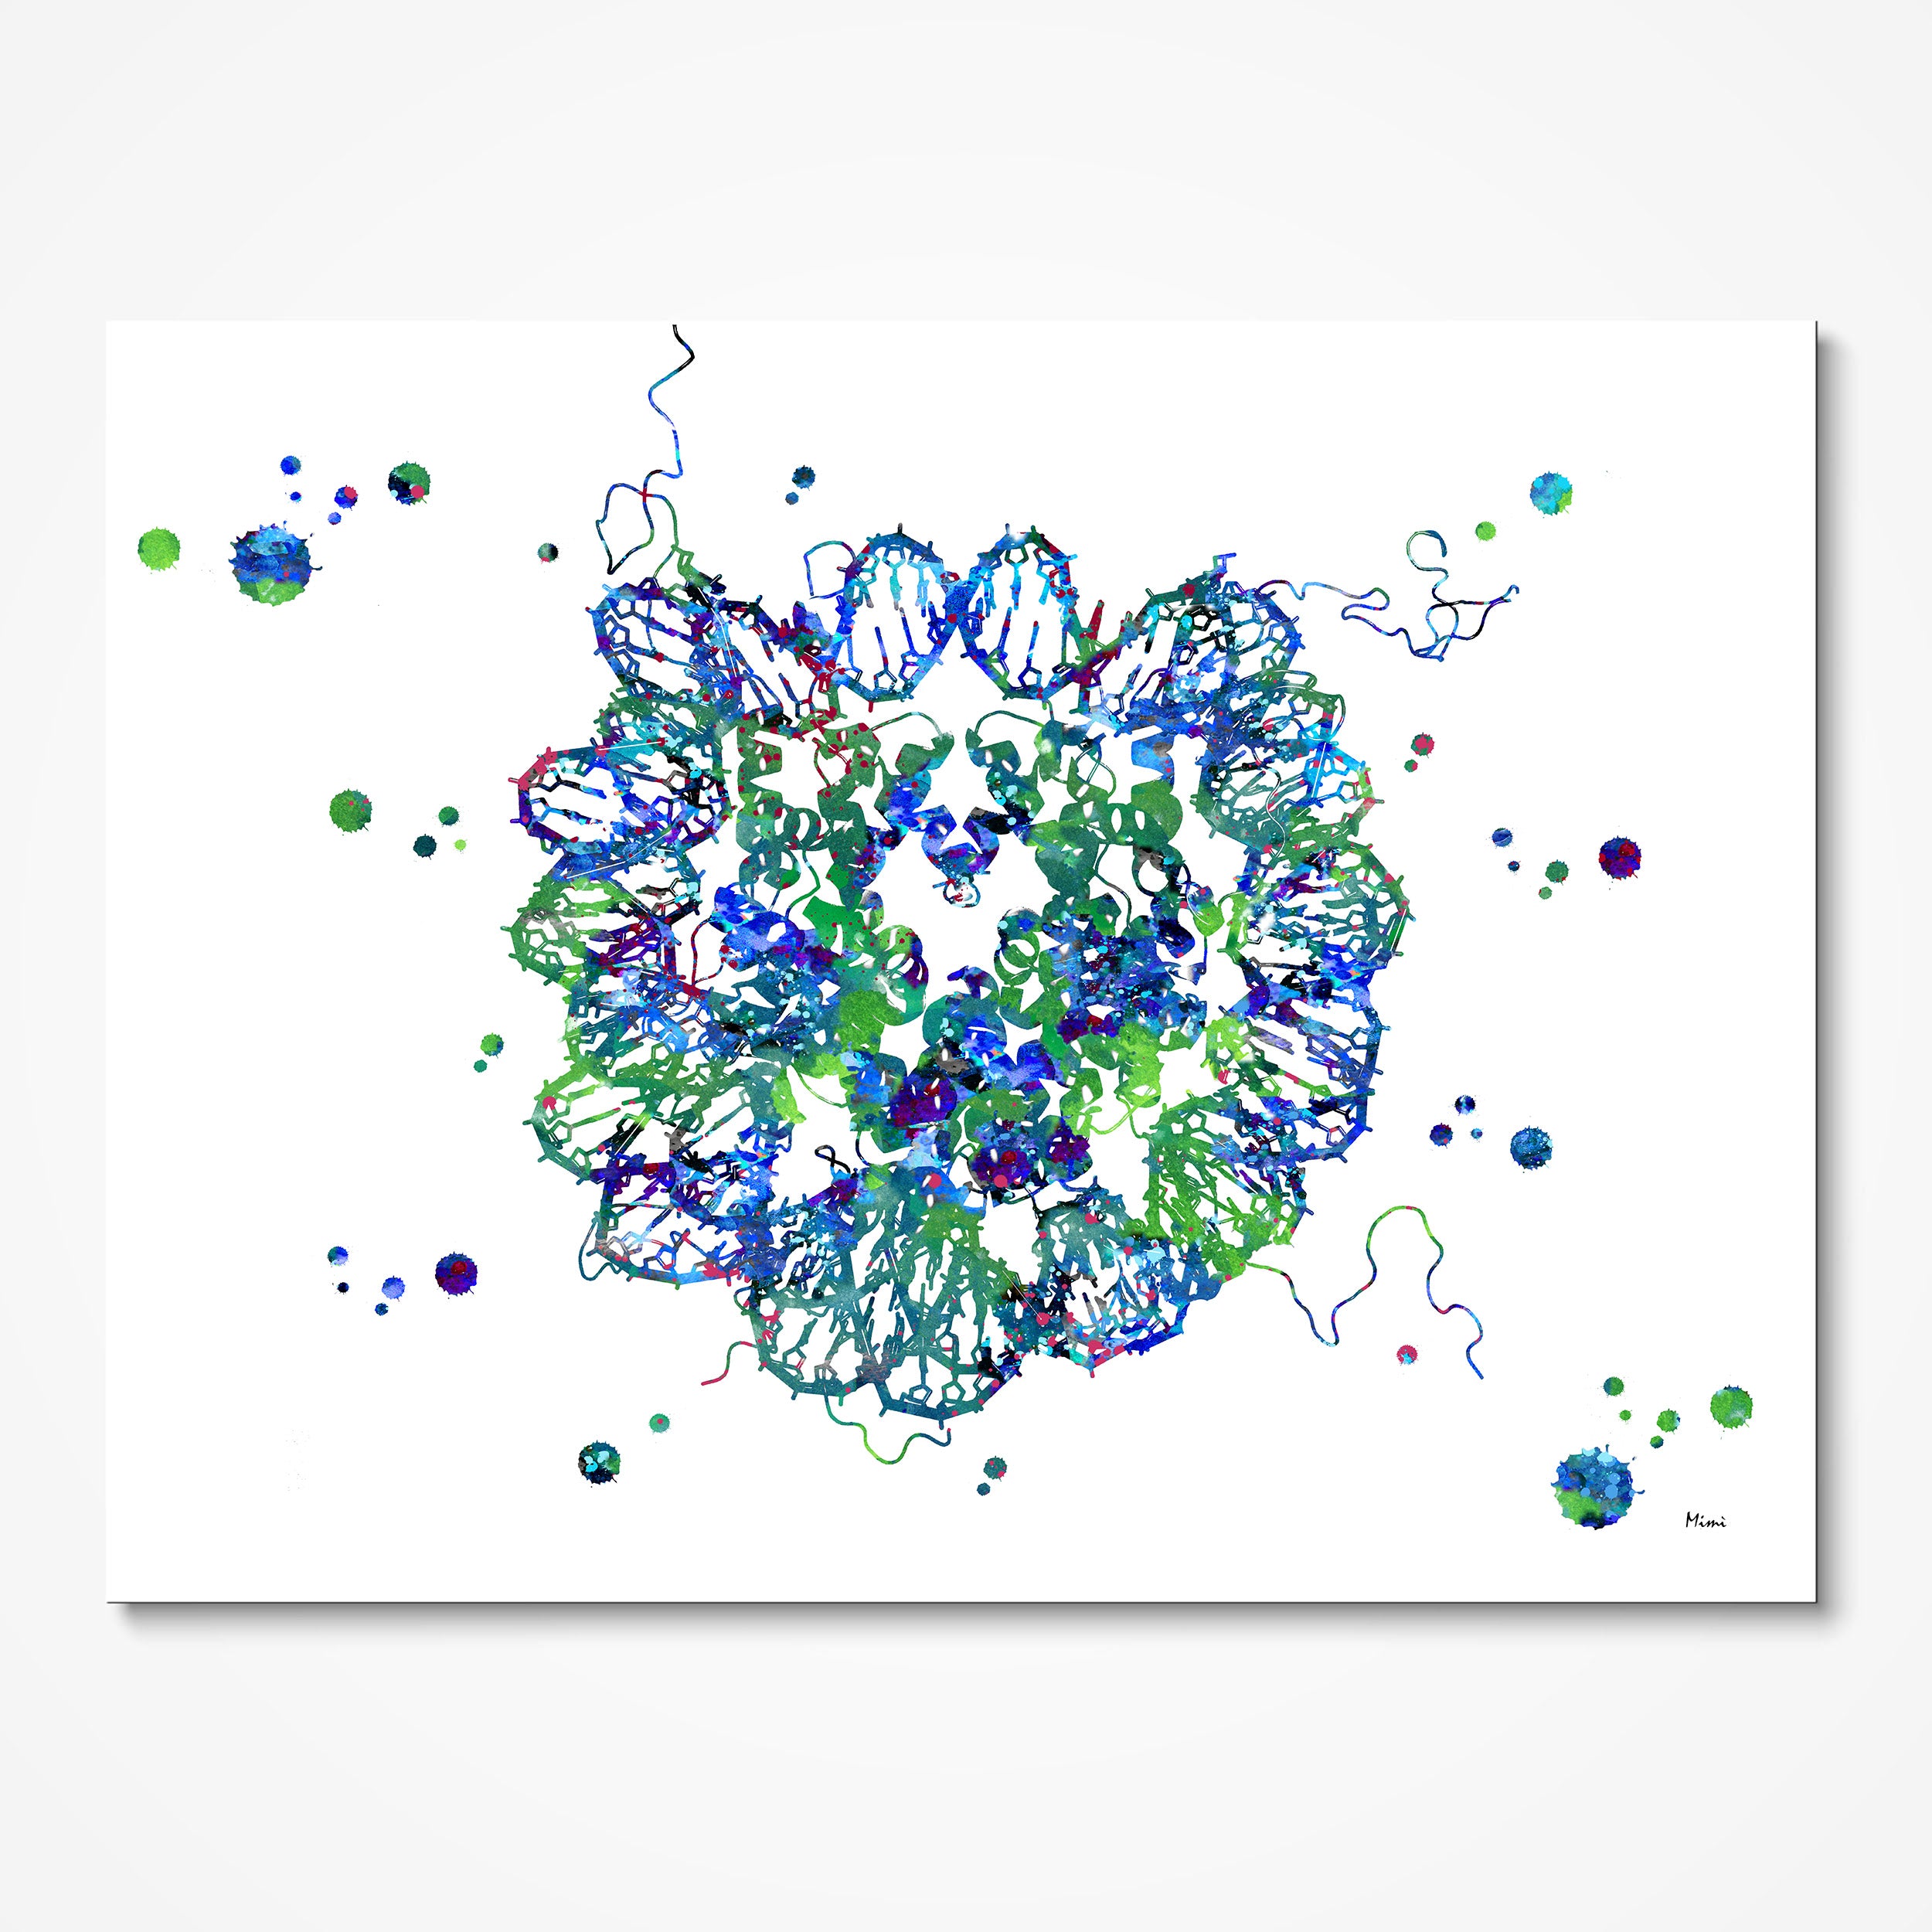 Nucleosome Watercolor Image 1